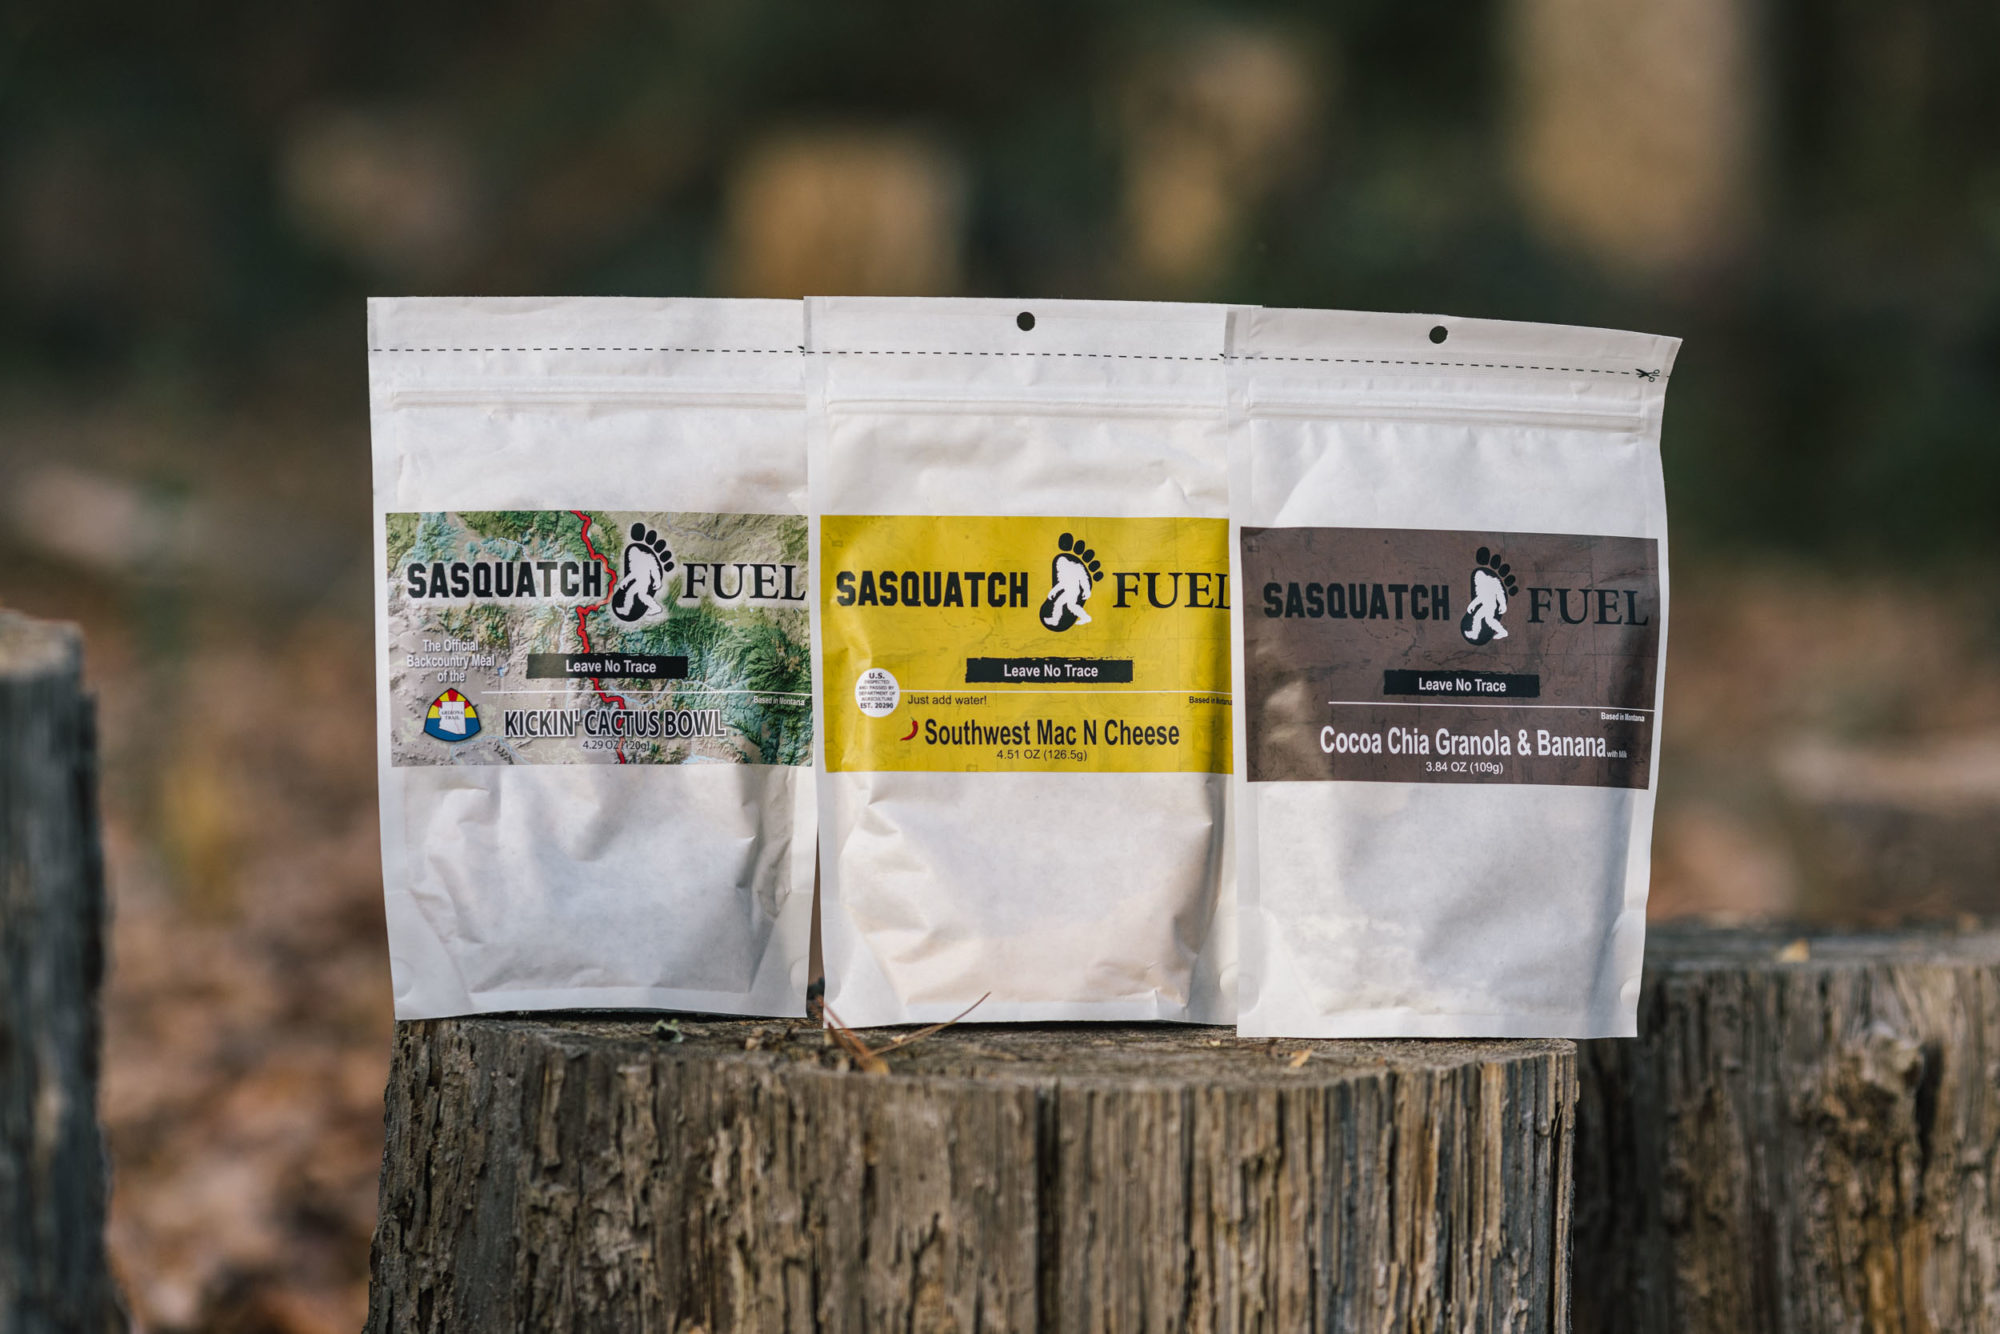 Sasquatch Fuel , Camping Meals in Compostable Packaging, Biodegradable